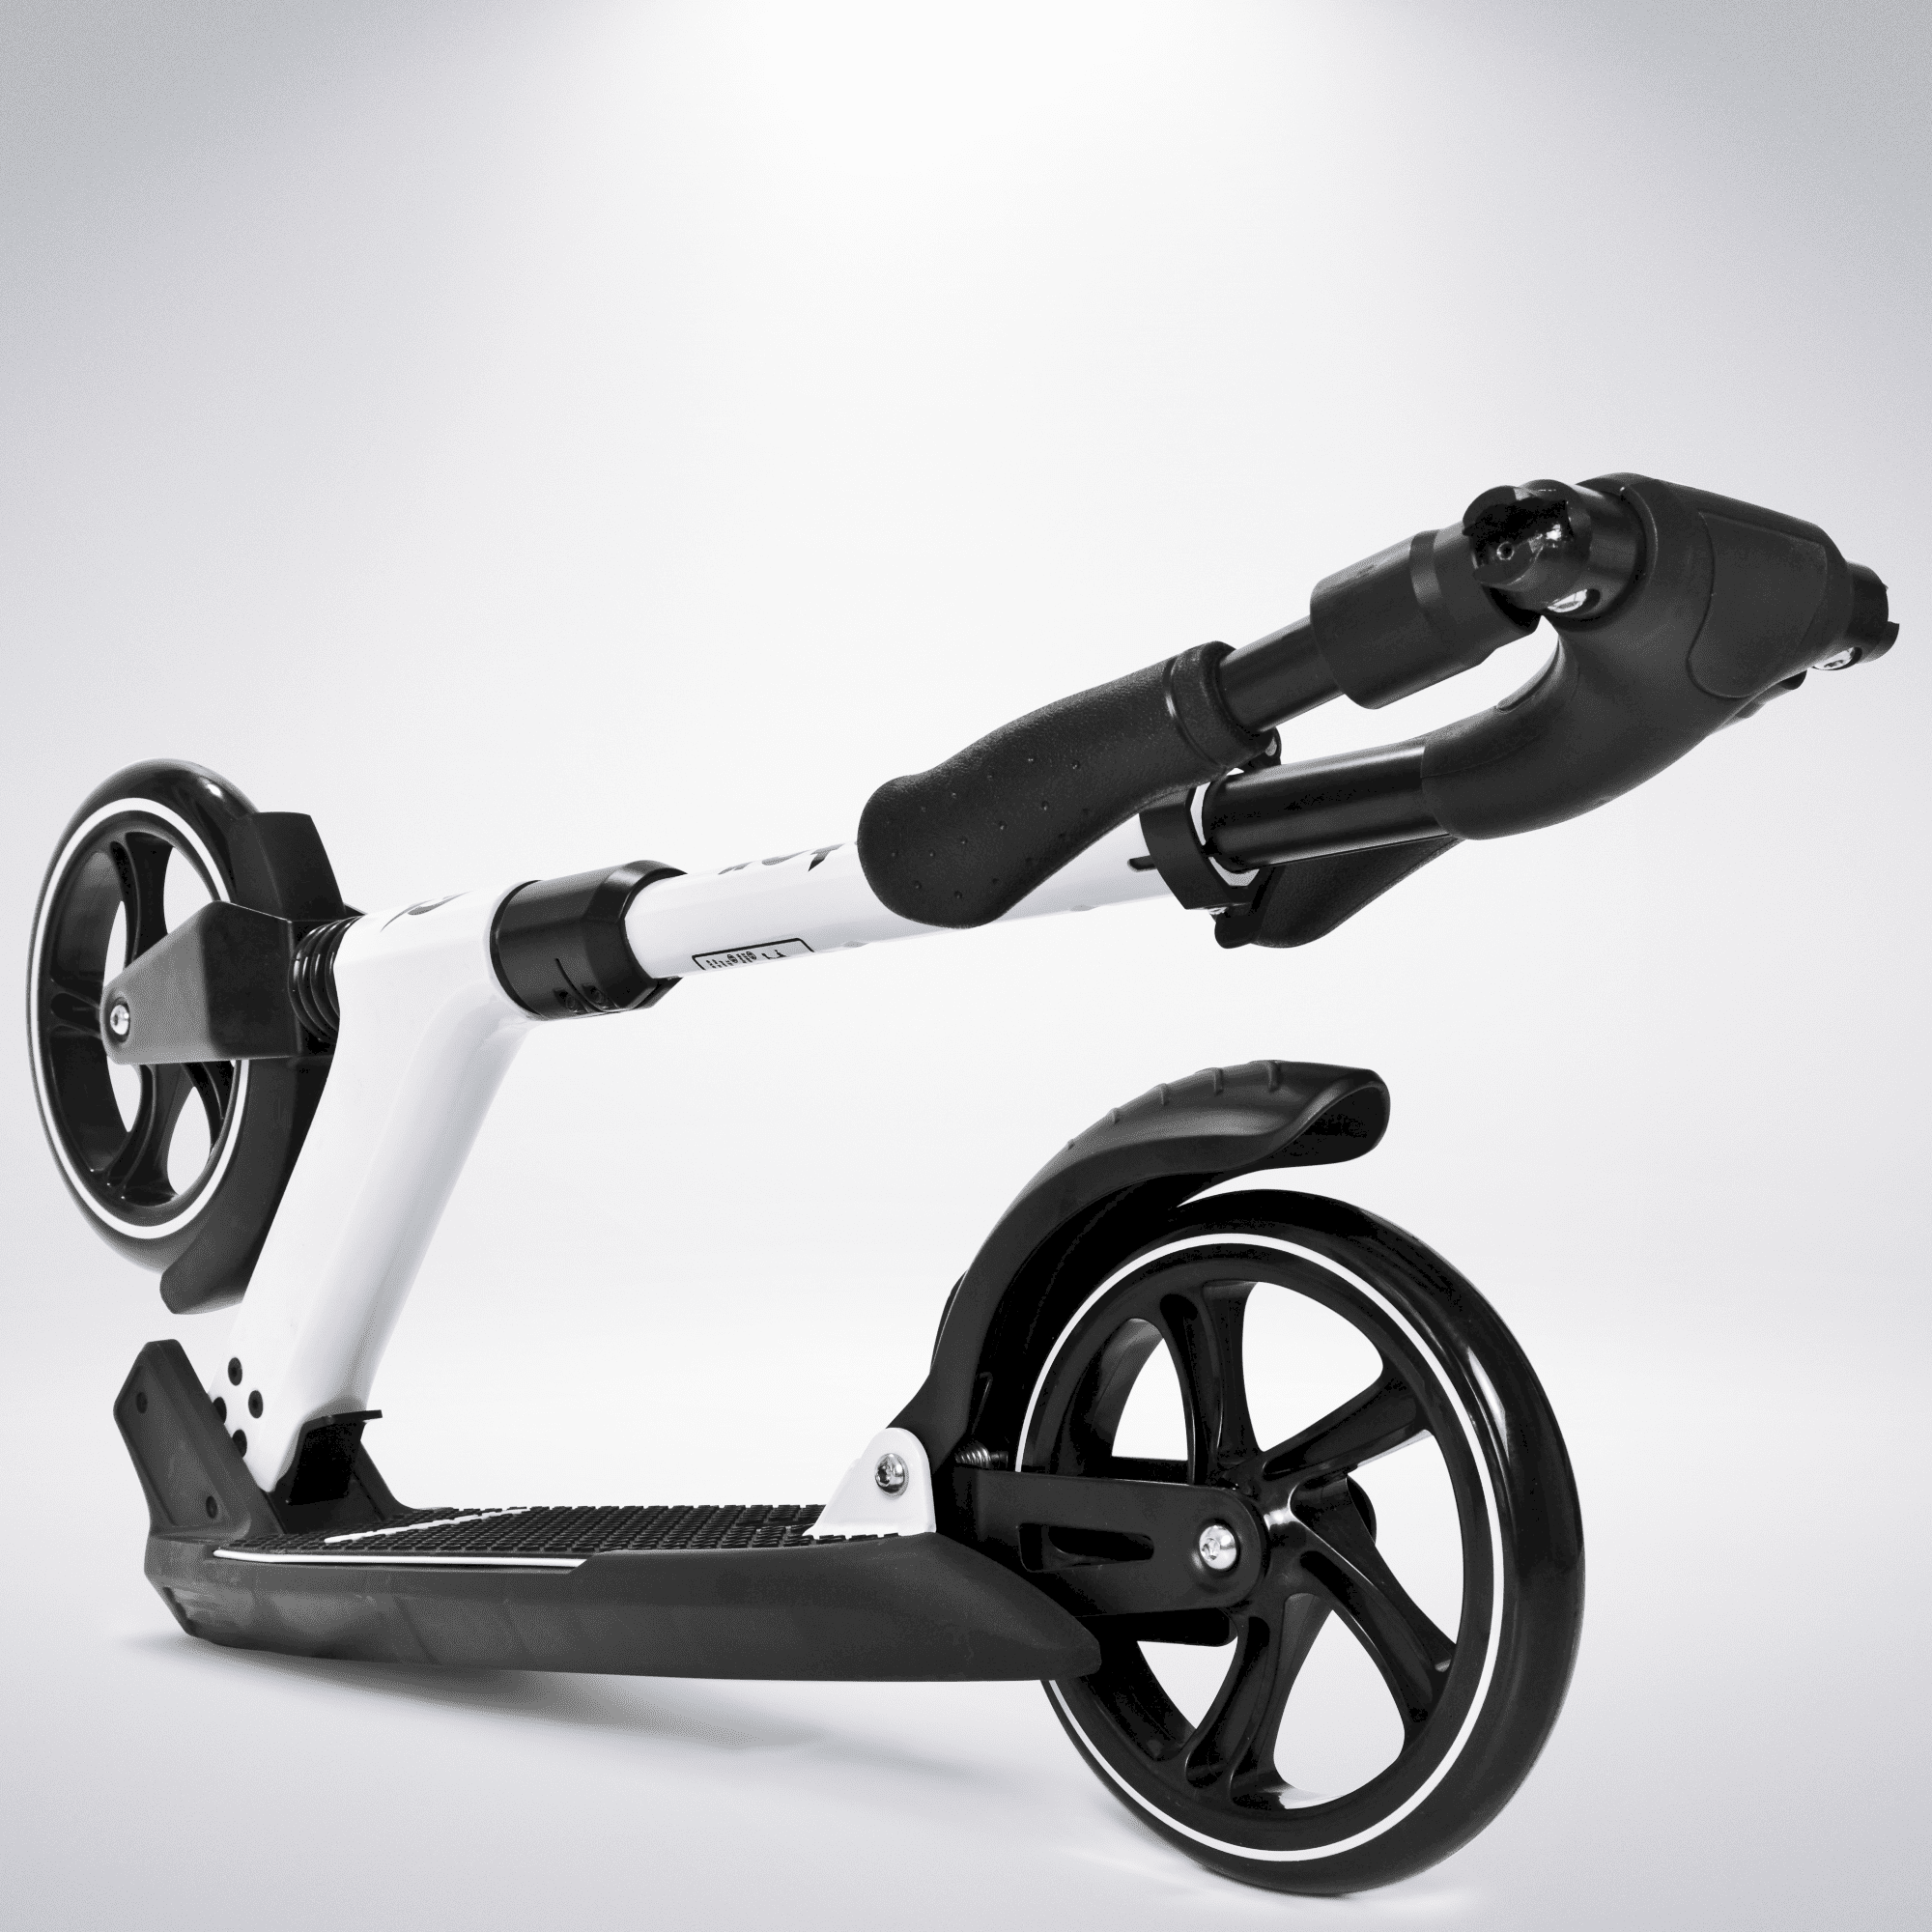 EXOOTER M7 Manual Adult Kick Scooter with Dual Suspension Shocks and 240mm/200mm Big Wheels. 